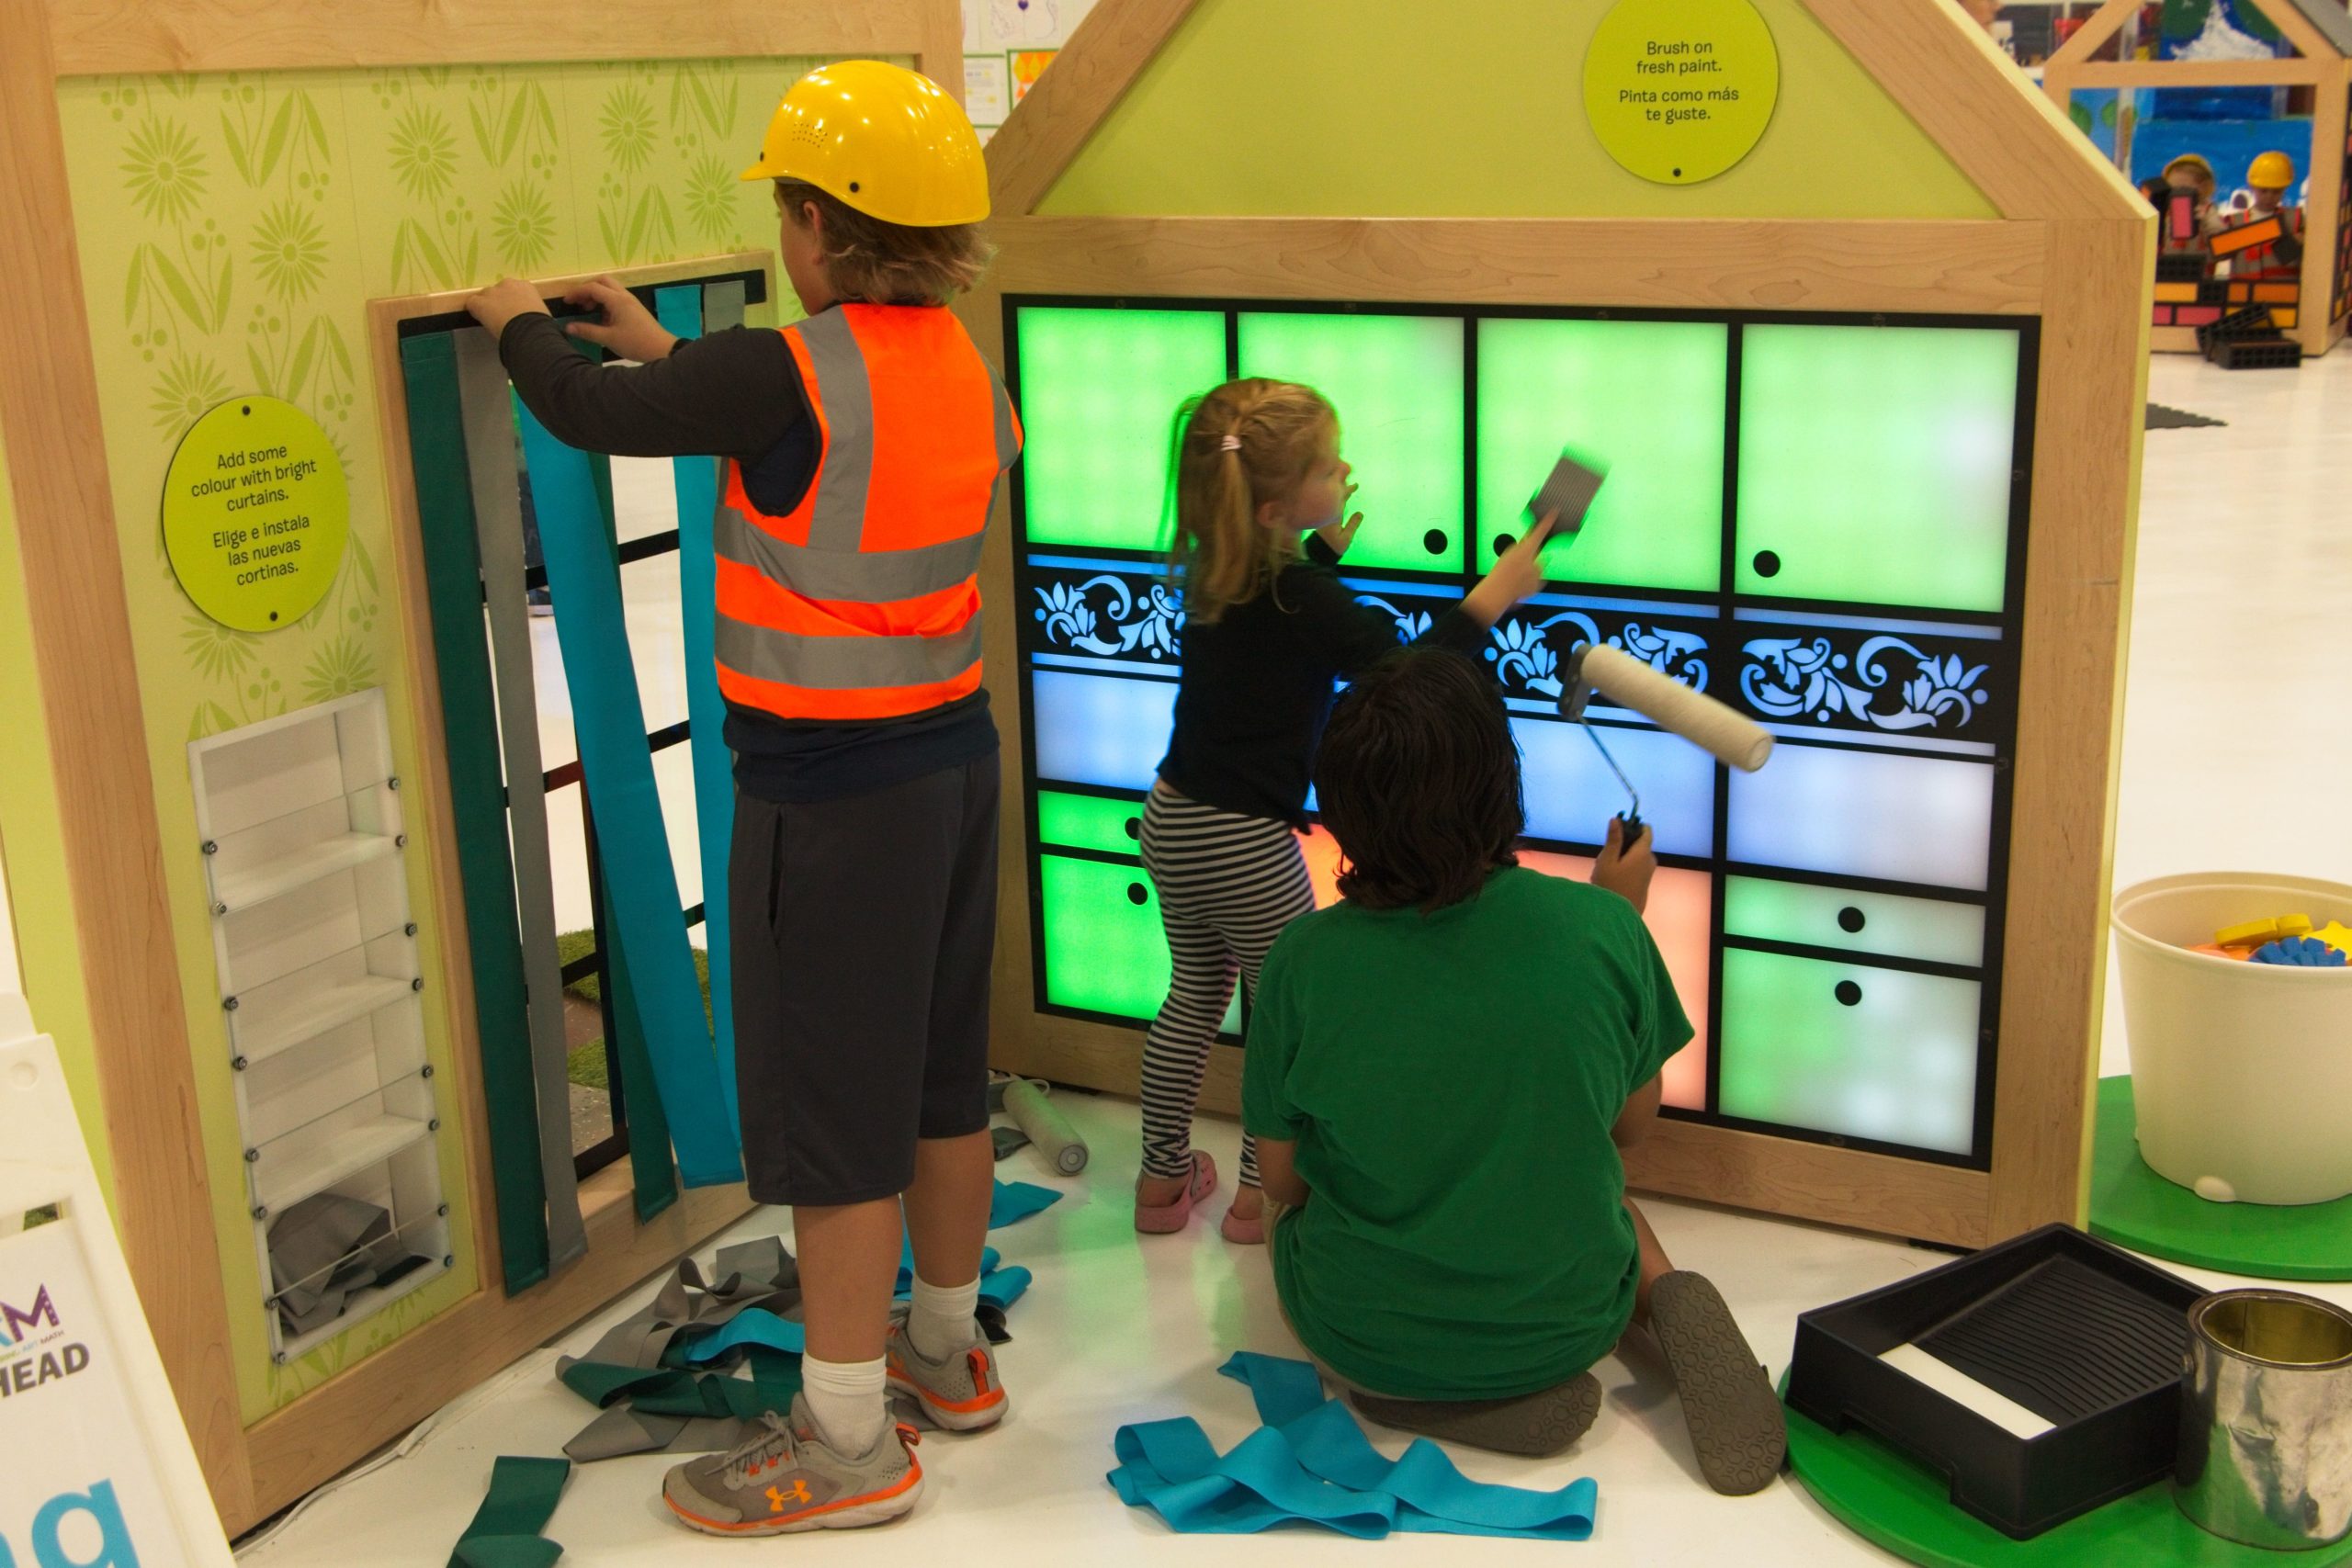 A boy in a hard hat hangs curtains and two children paint a digital color wall